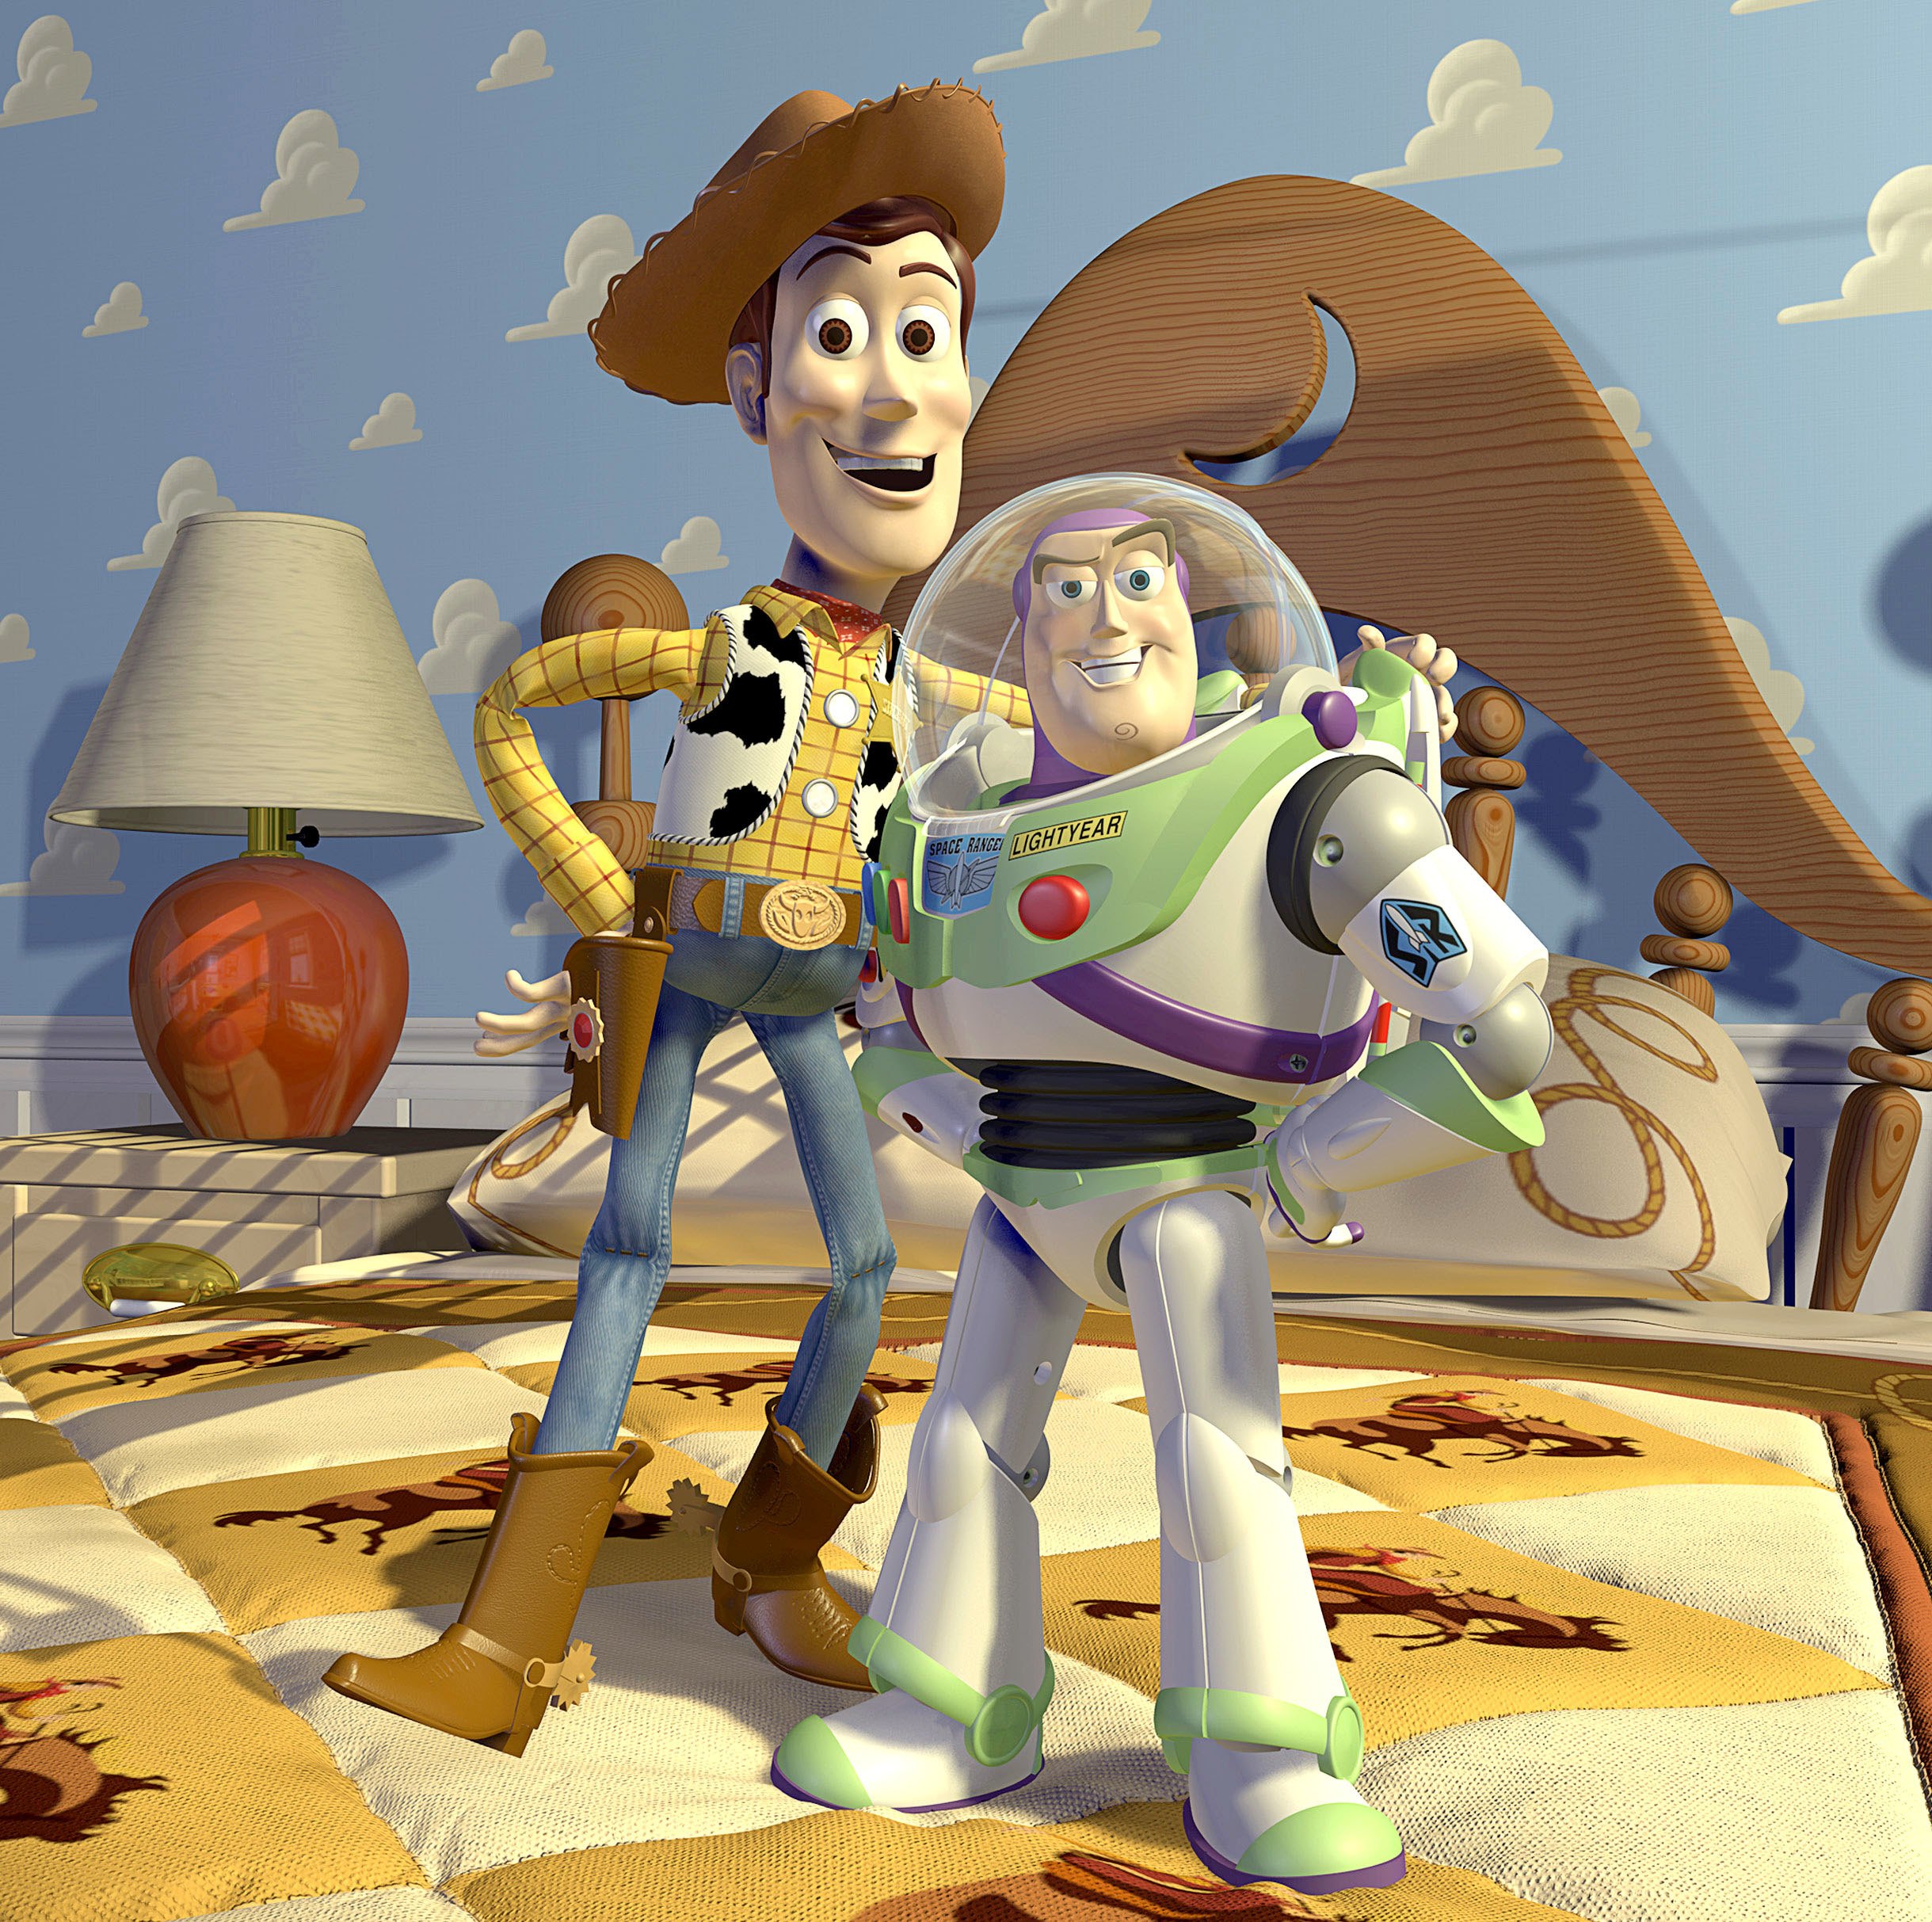 Animated Buzz and Woody from the Toy Story franchise posing together